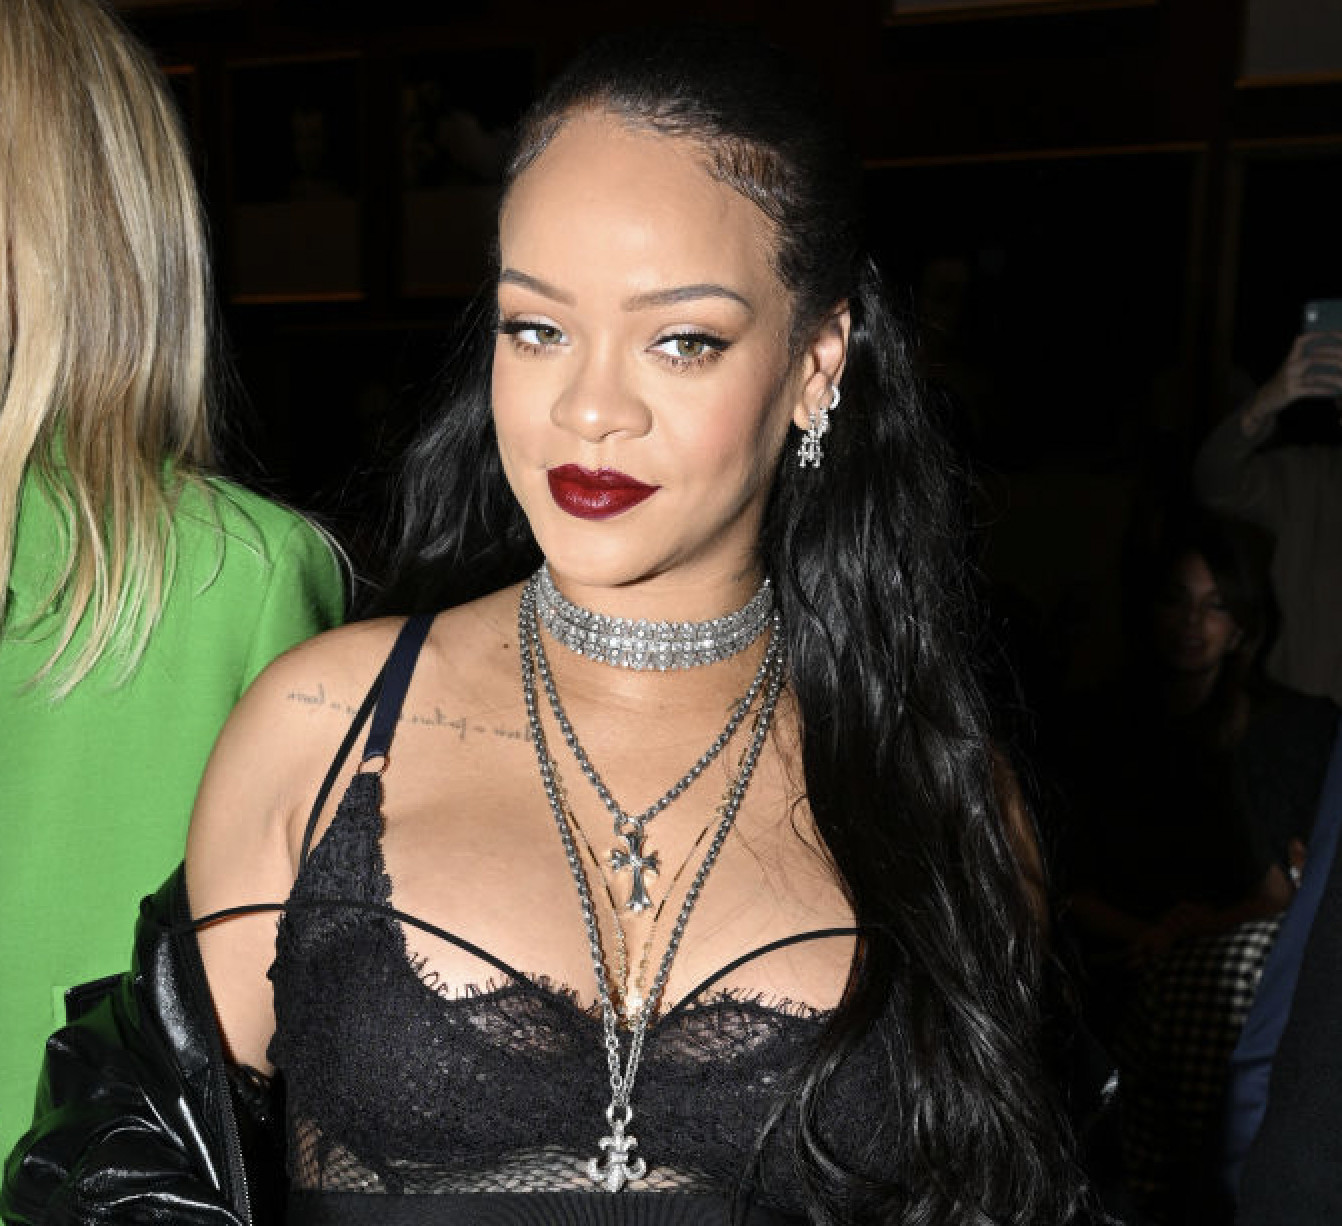 Rihanna Arrives Fashionably Late In Black Sheer Lingerie To Dior’s Paris Fashion Week Show: Watch